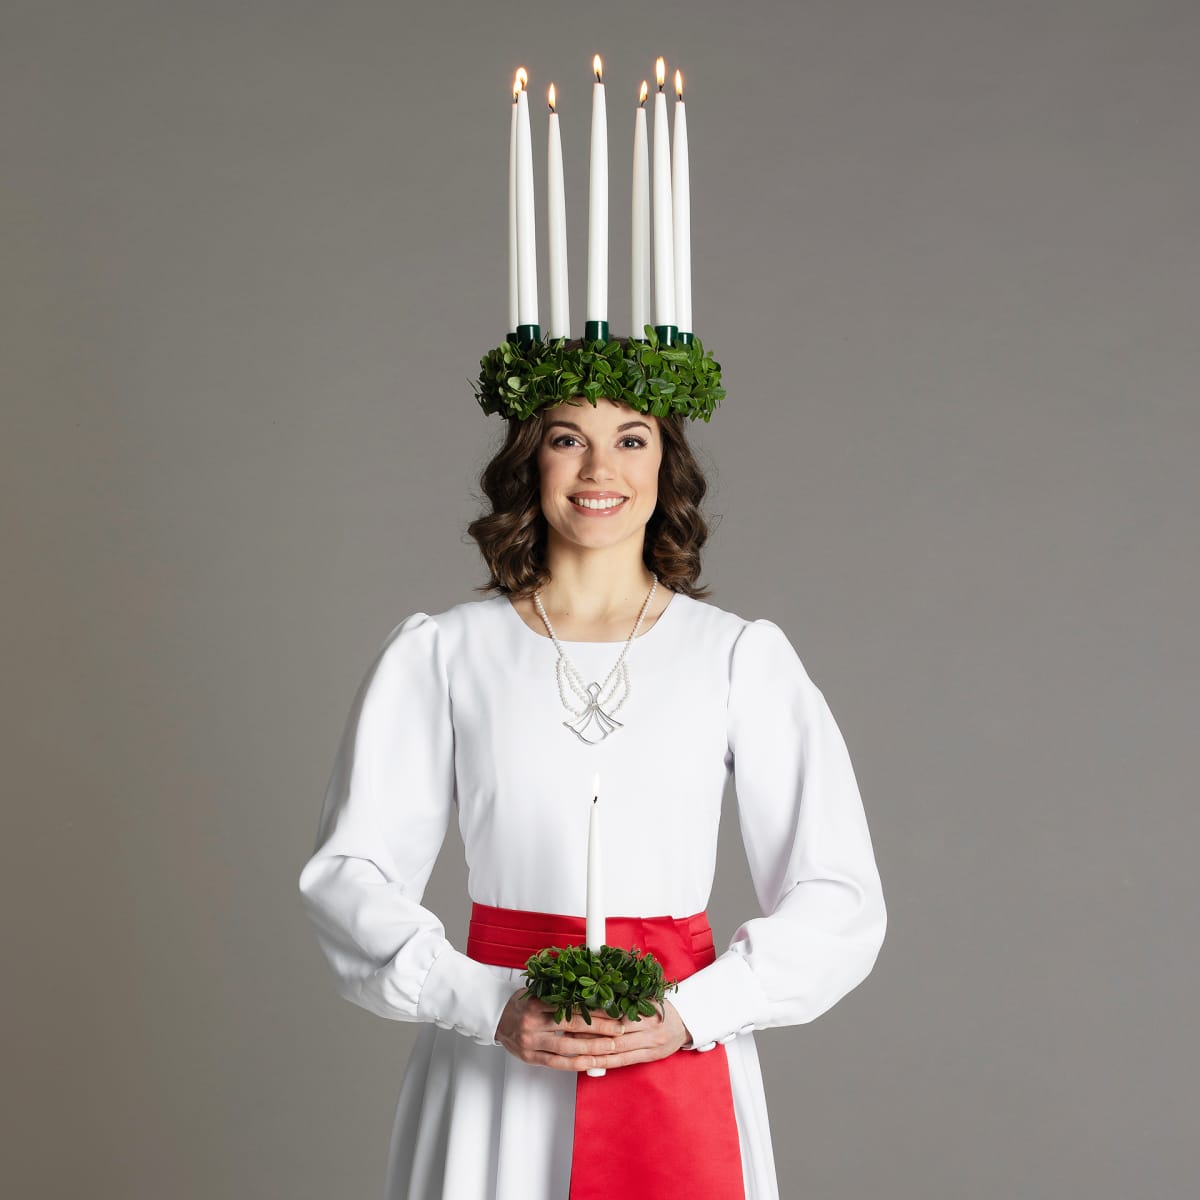 Lucia Day brightens Friday 13th gloom | News | Yle Uutiset